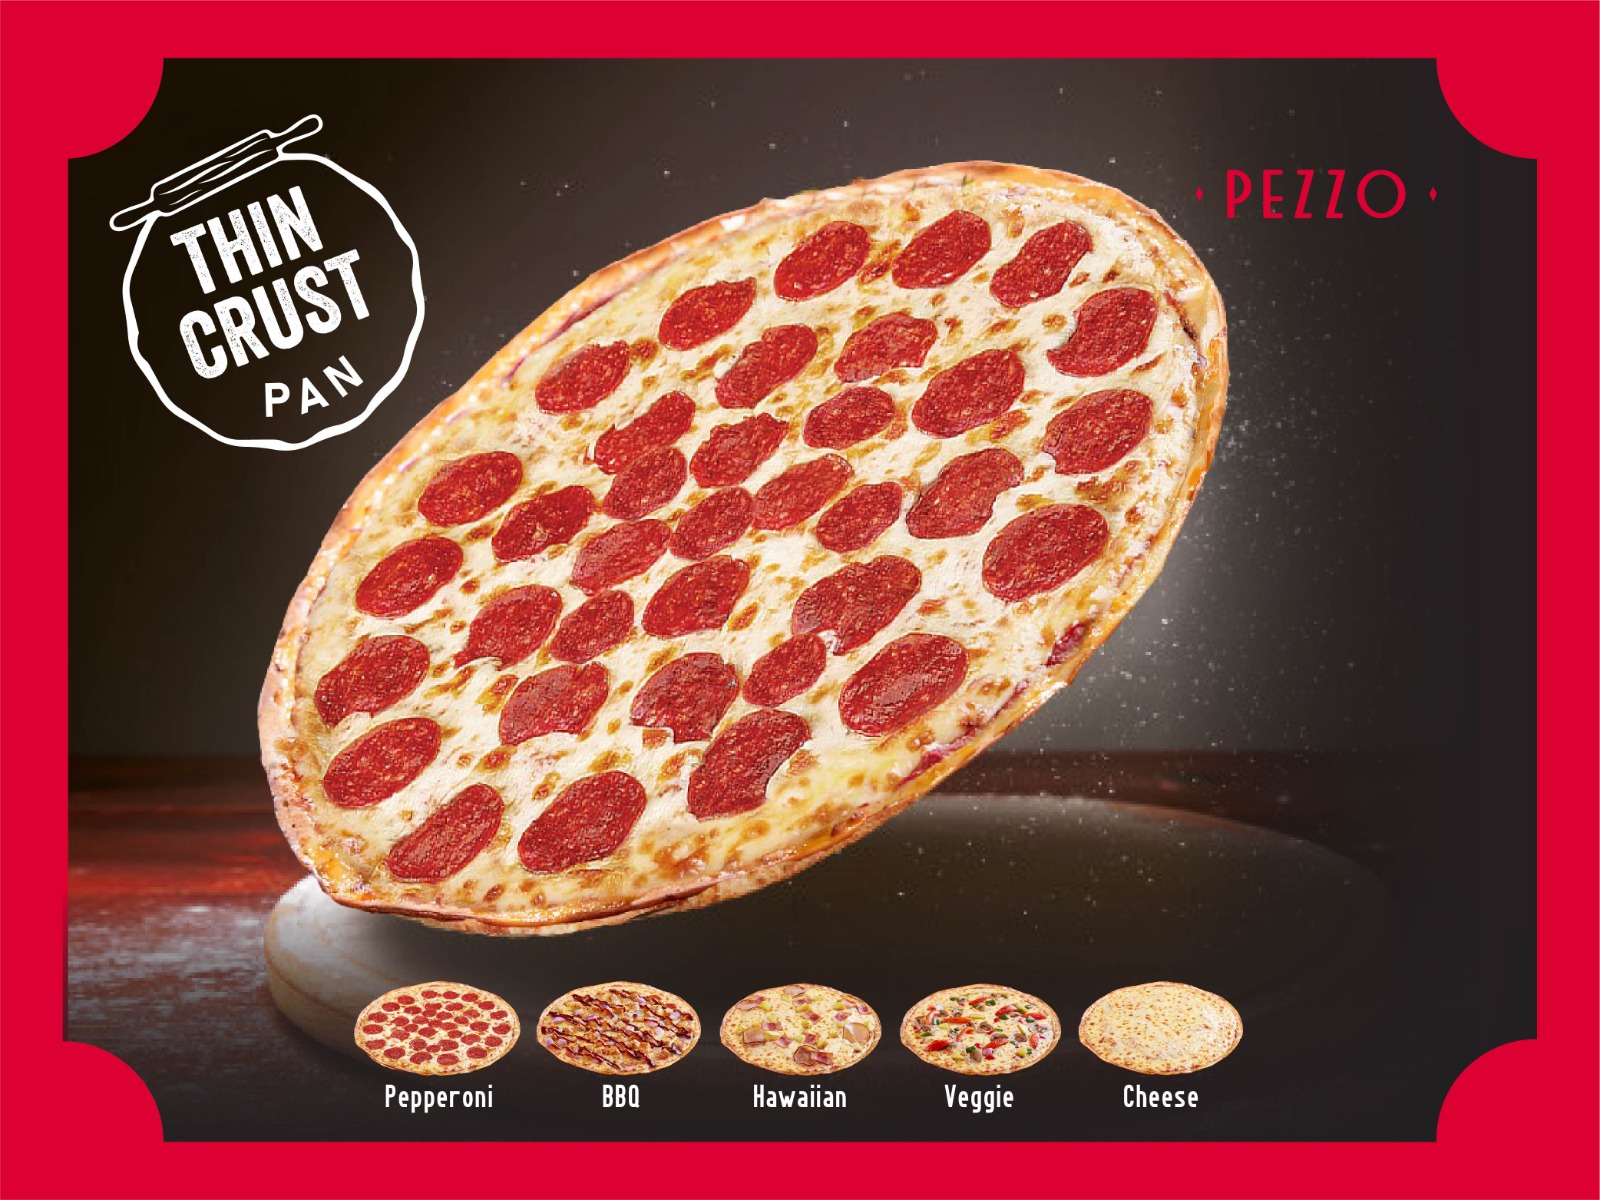 1 x 13 Thin Crust Pizza Pan - exclusive deal" at Pezzo - Get Deals, Cashback and Rewards with ShopBack GO